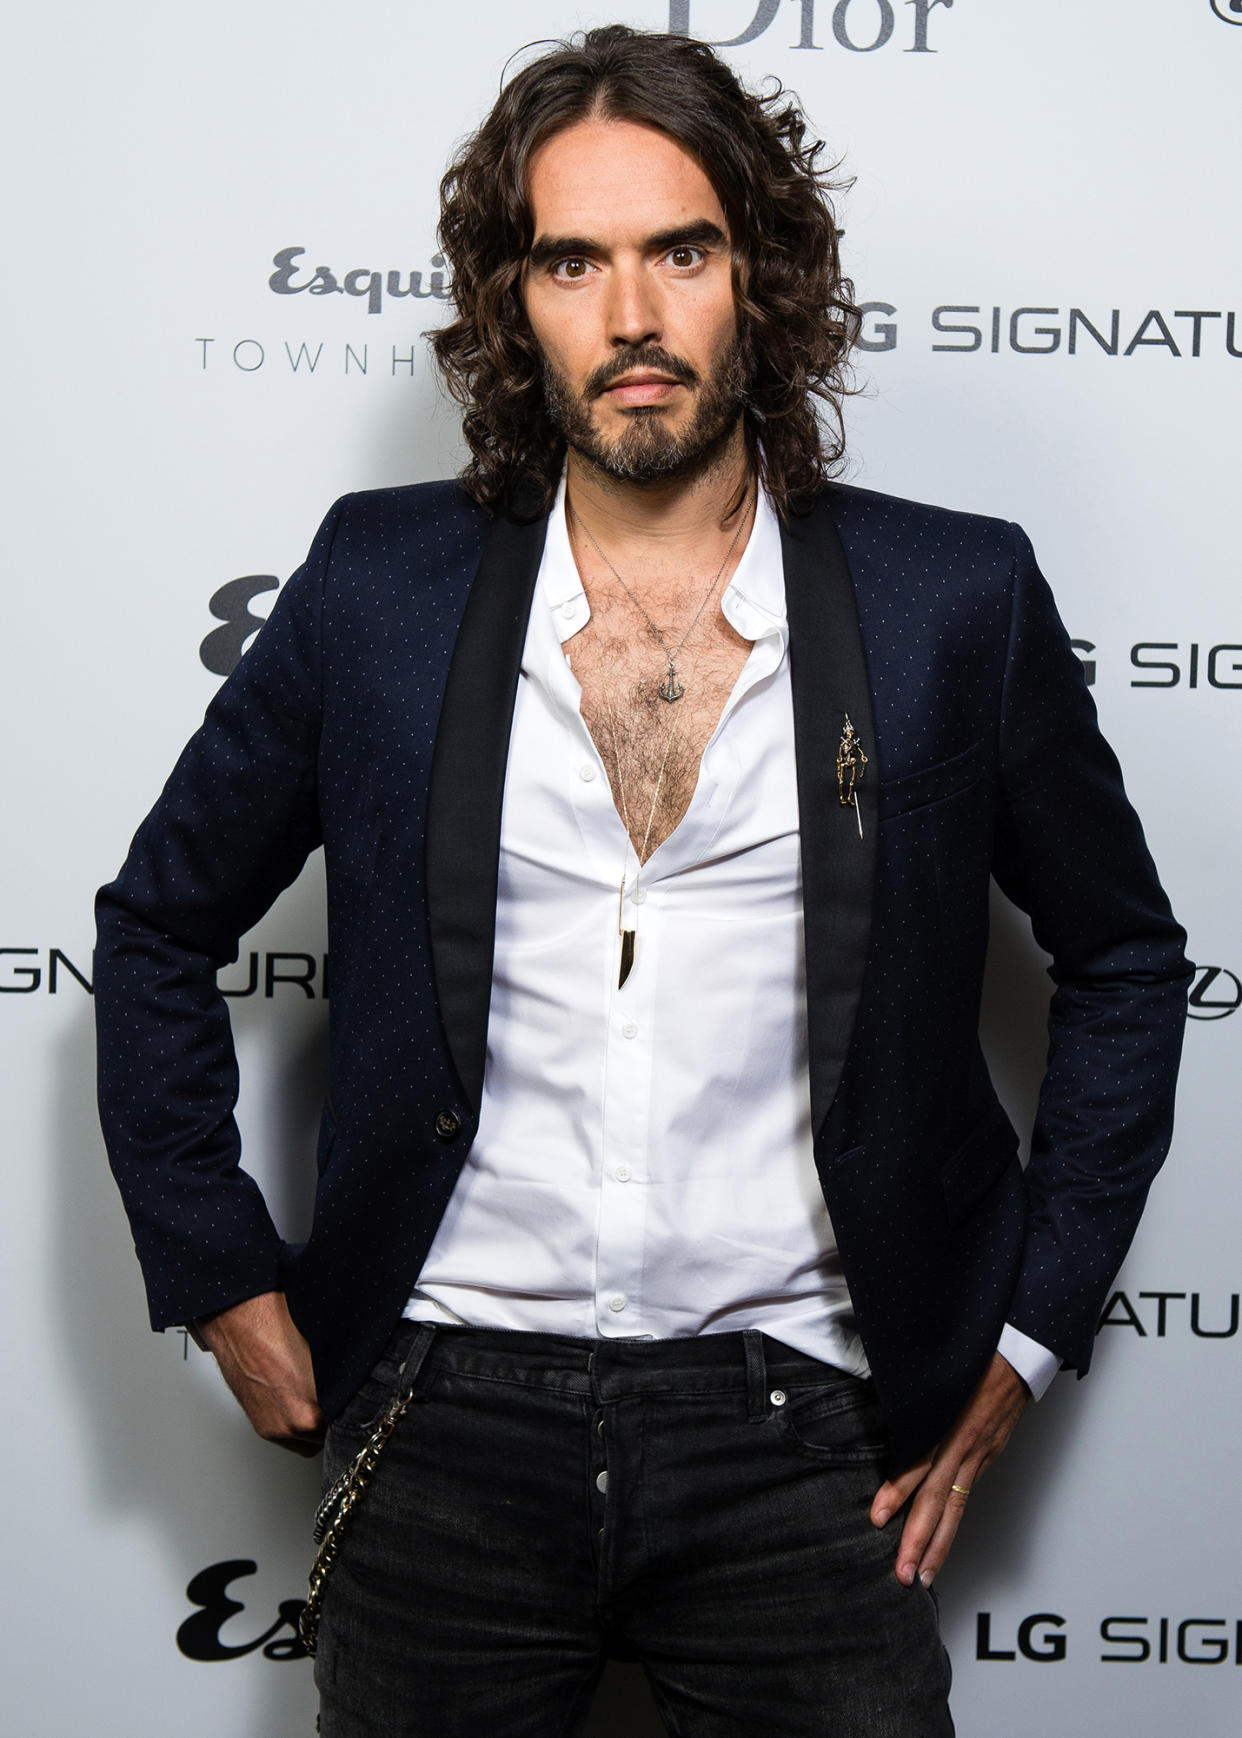 Russell Brand Denies ‘Astonishing’ Criminal Allegations Surrounding His 'Promiscuous' Past